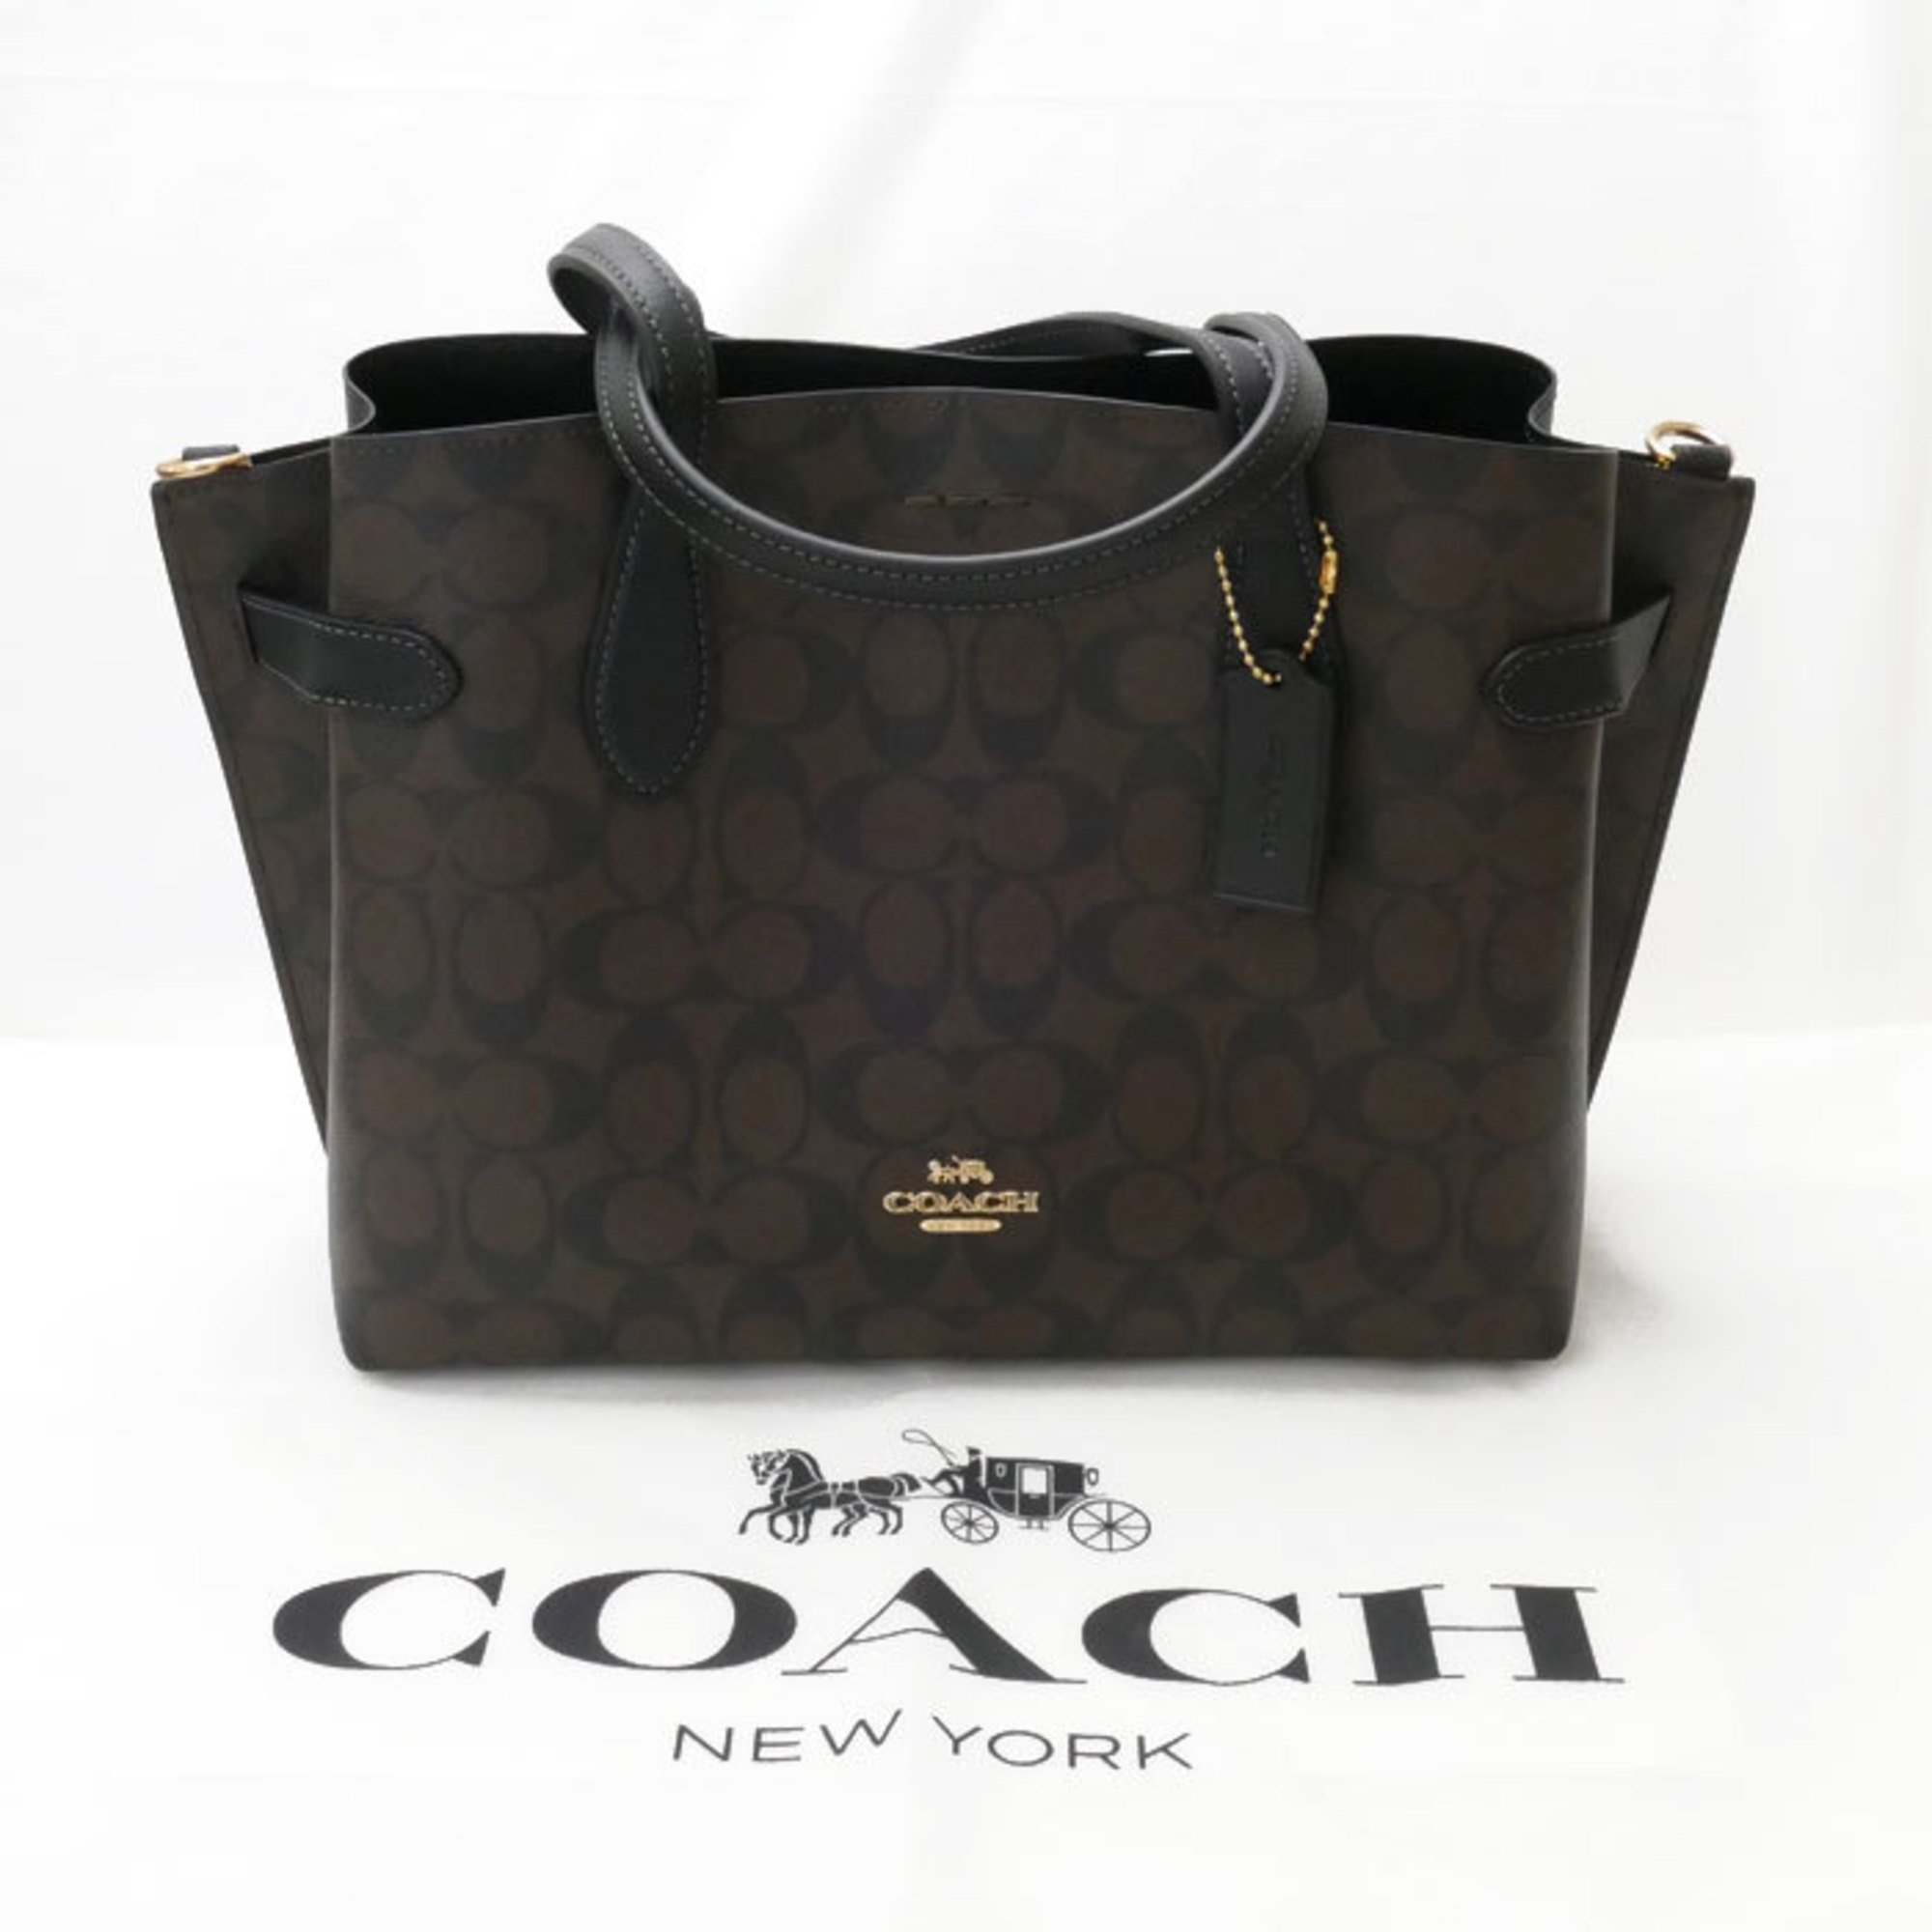 COACH Hannah Carryall 2Way Shoulder Tote Bag Brown/Black CH542 IMAA8 Outlet Women's